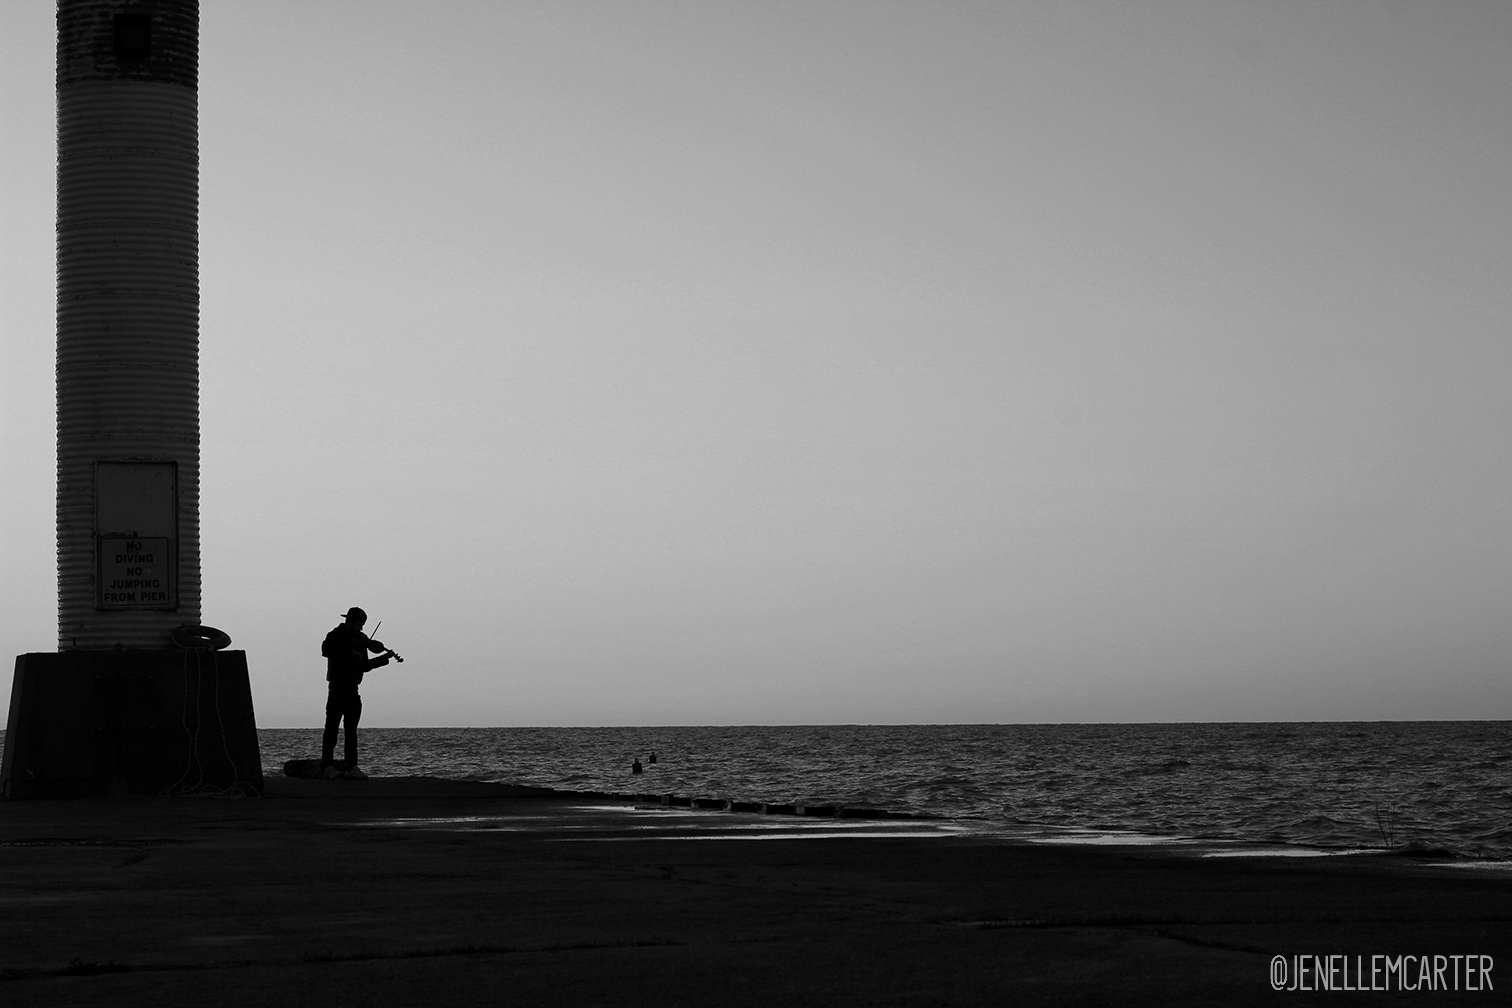 The silhouette of a young man playing the violin on a pier.